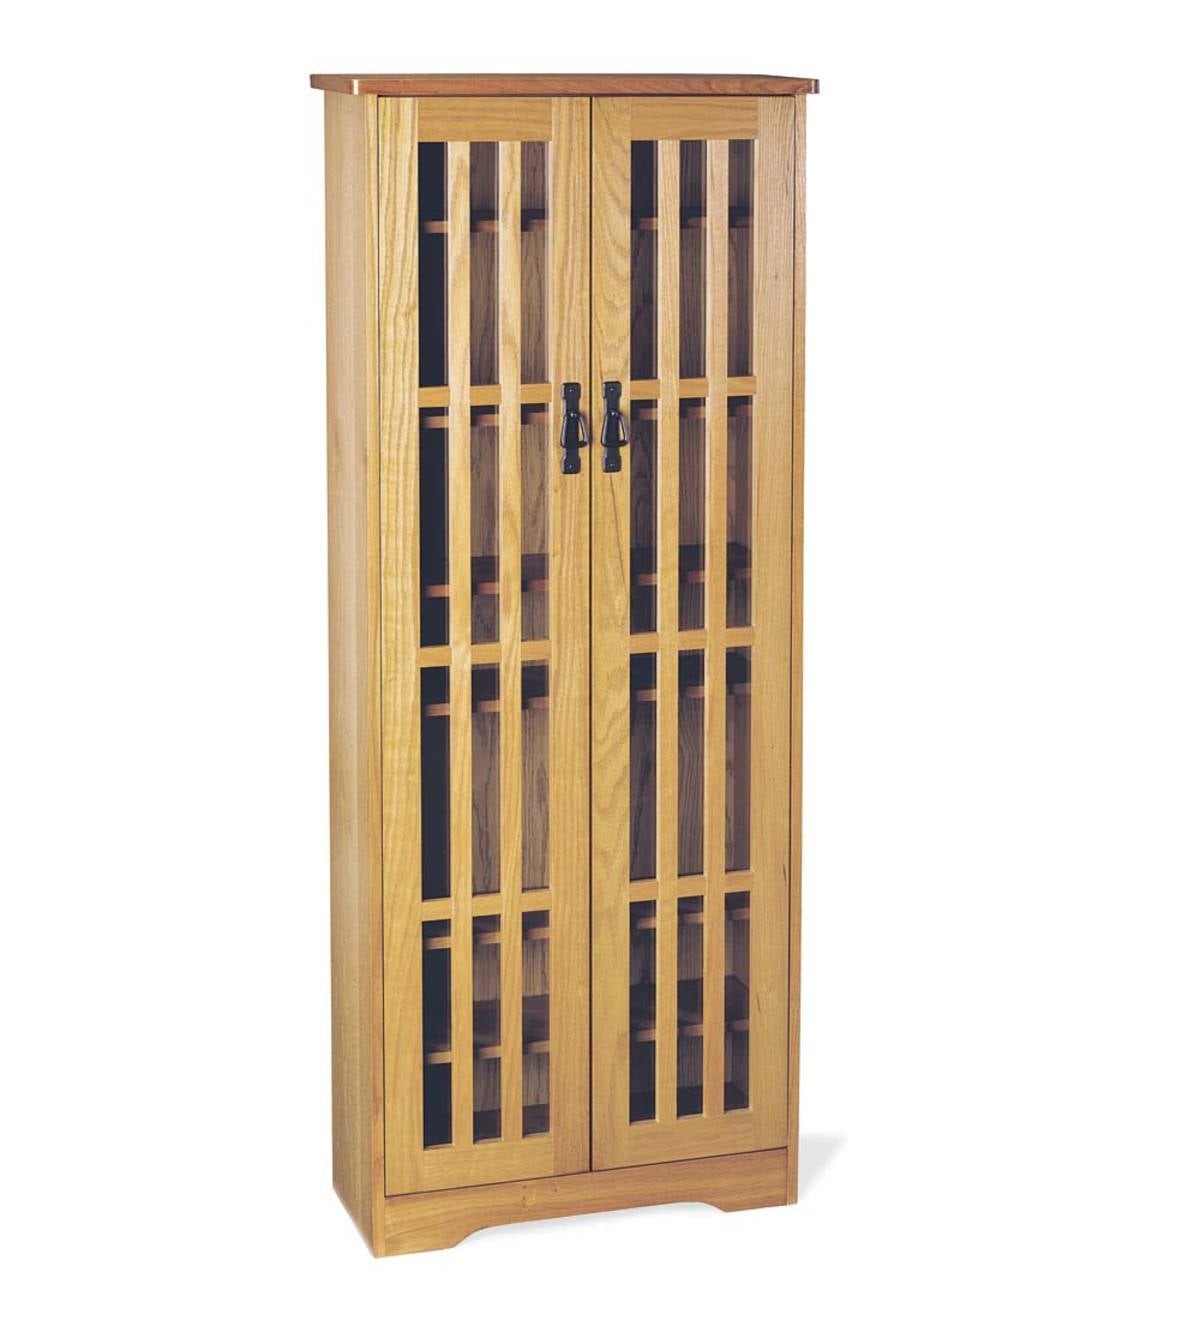 Large Arts and Crafts Style Glass-Front Media Storage Cabinet with Adjustable Shelves in Oak Finish